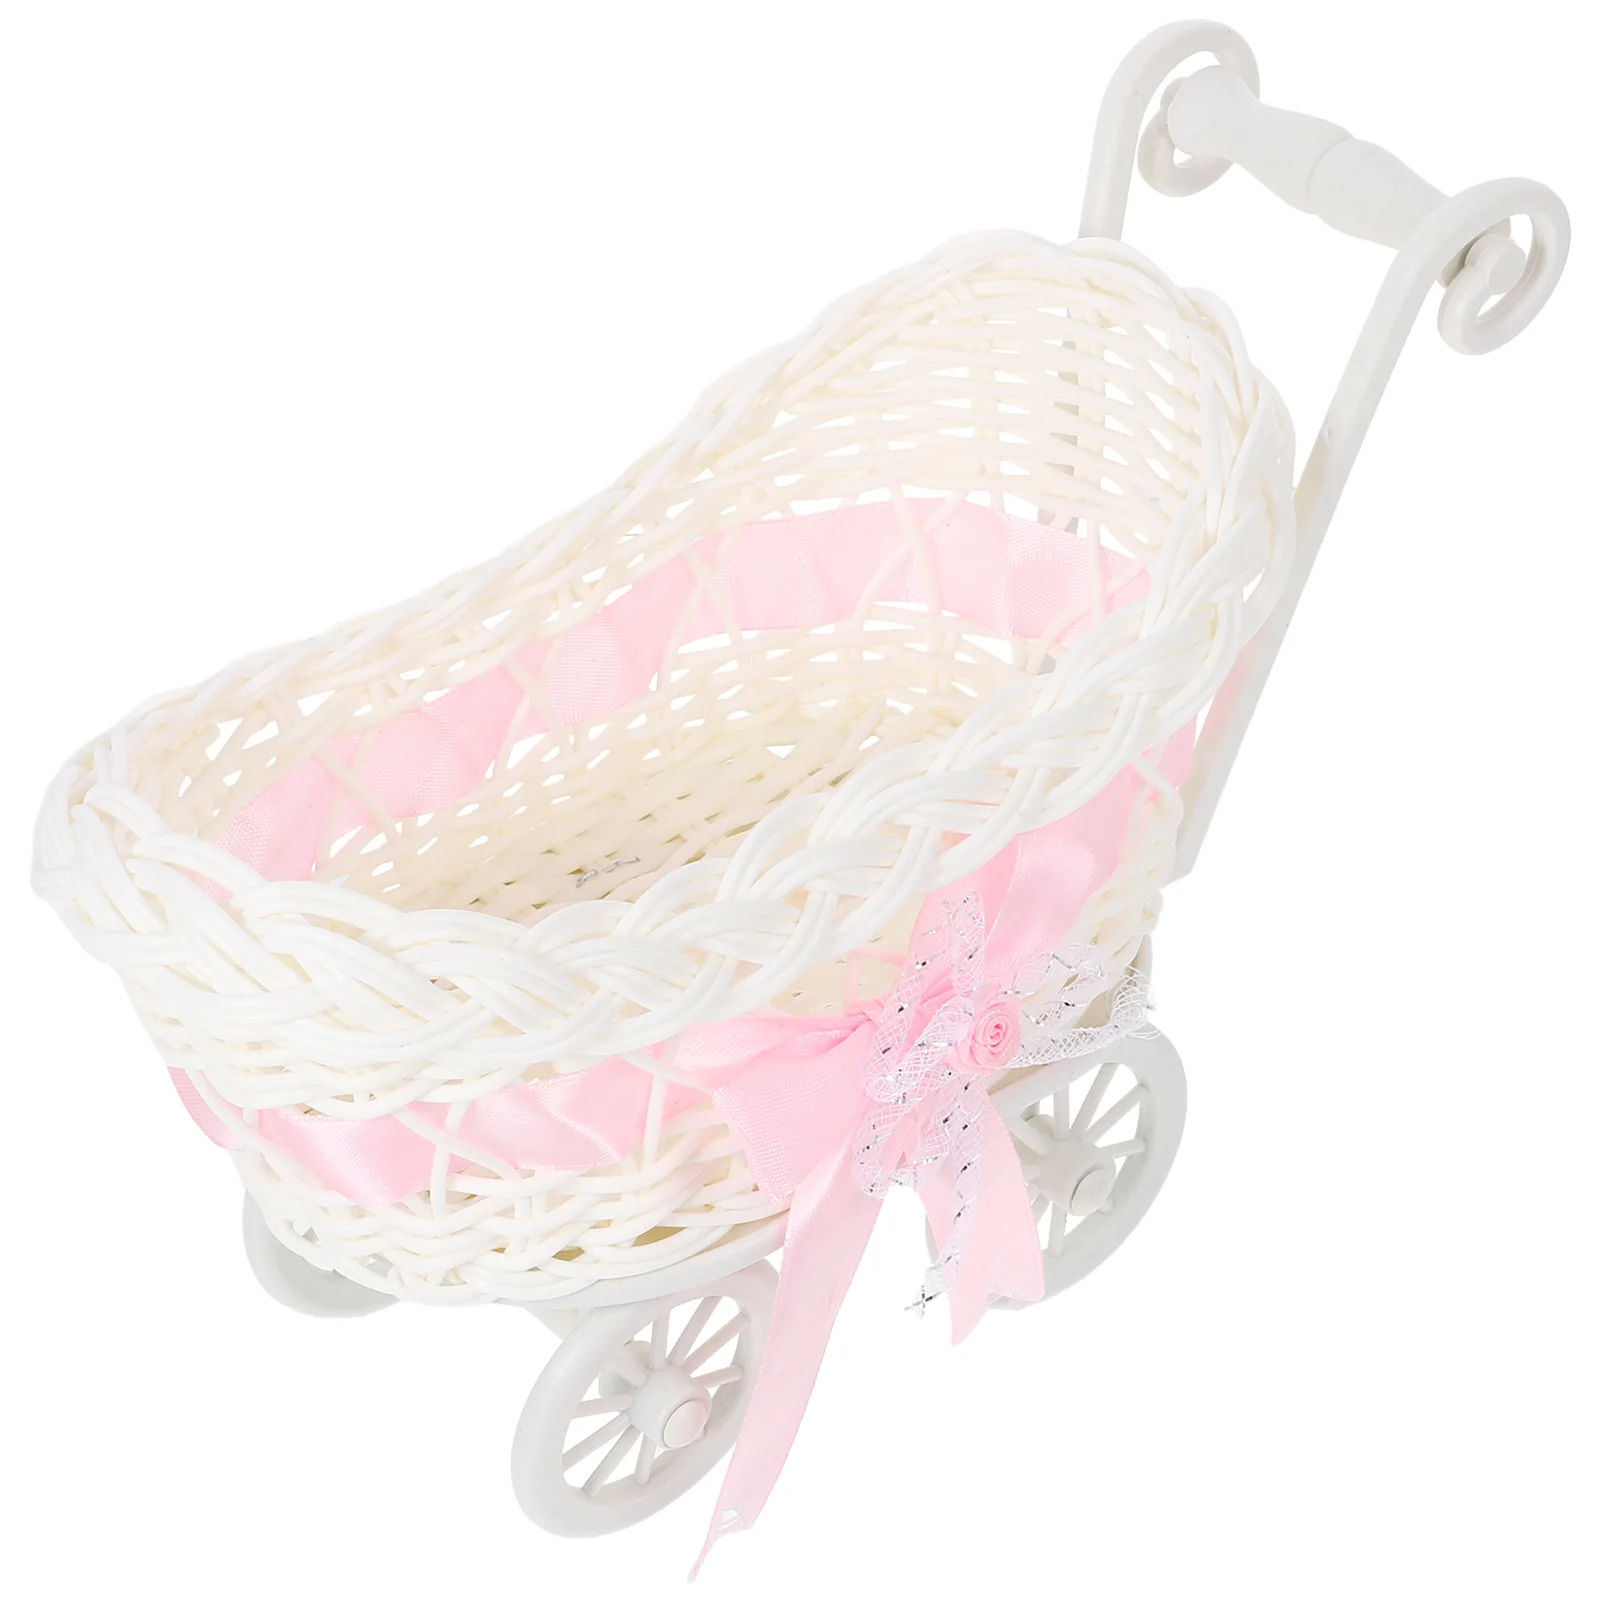 Basket Baby Cart Shopping Shower Stroller Woven Decorations Mini Cutie Candy Wicker Storage Serving Toy Fruit Rattan Carriage